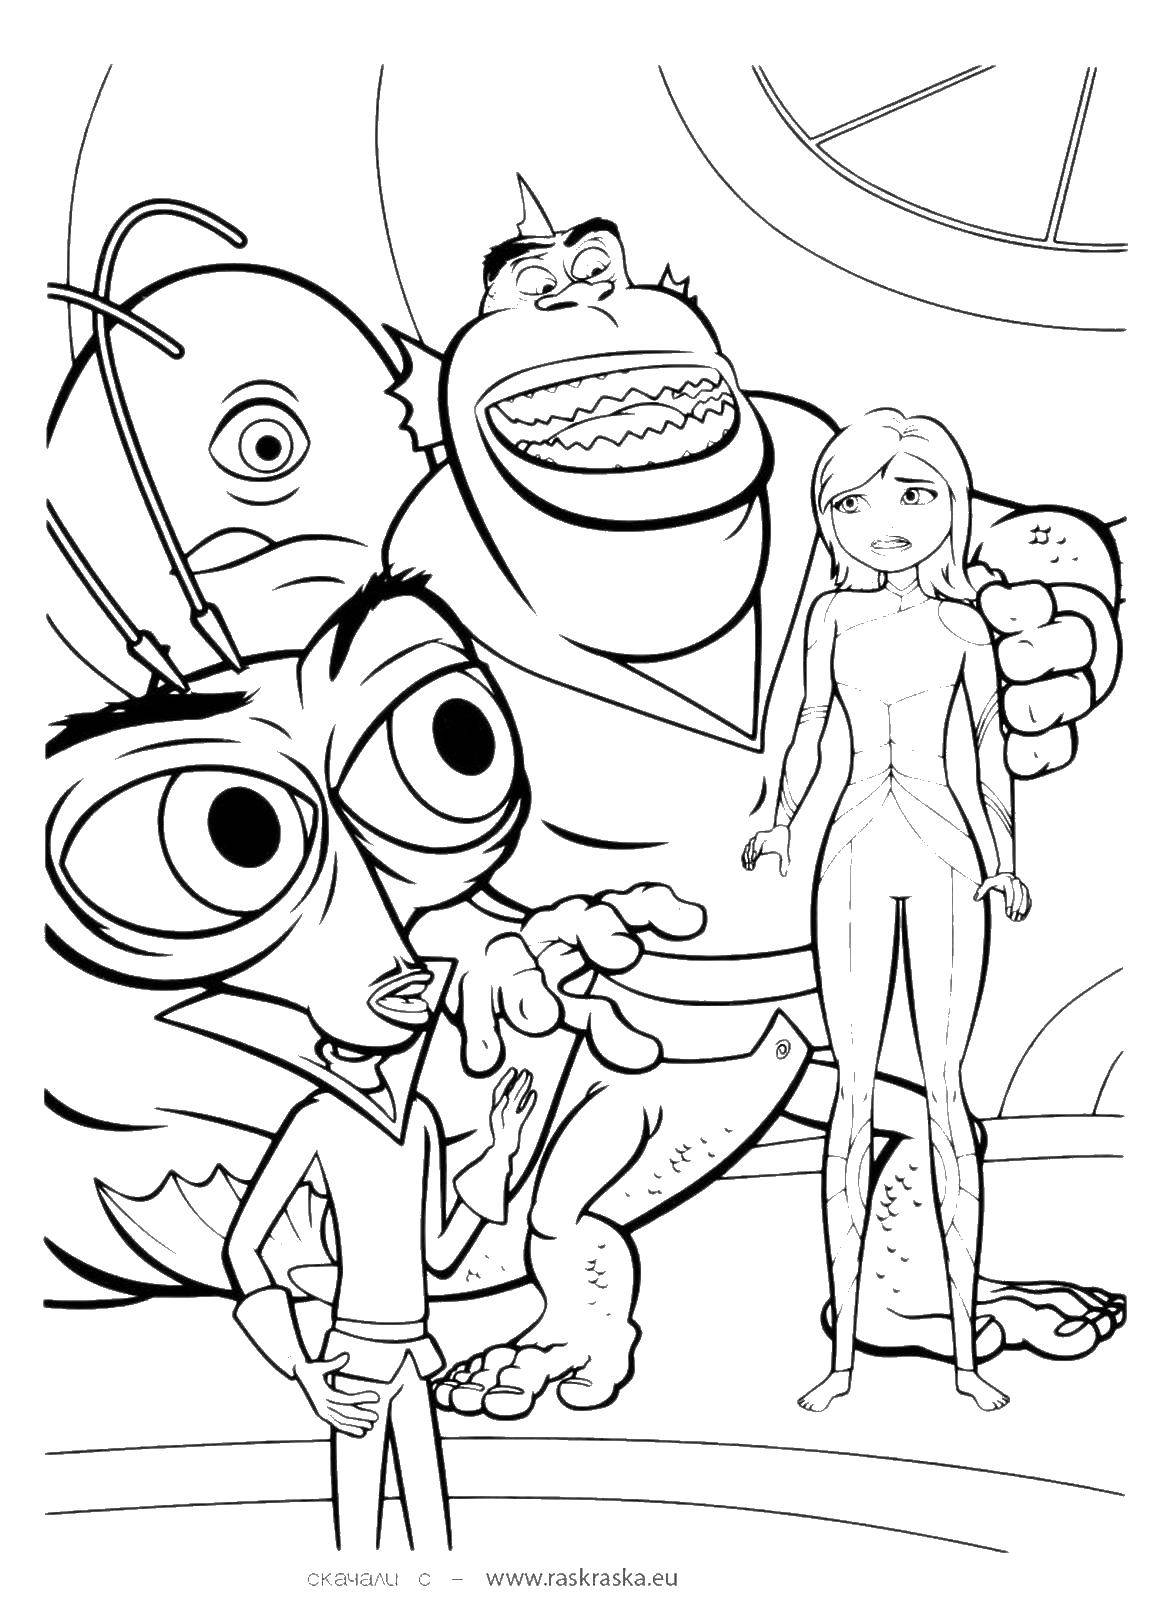 Coloring Monsters. Category Monsters. Tags:  cartoon, Monsters vs aliens.